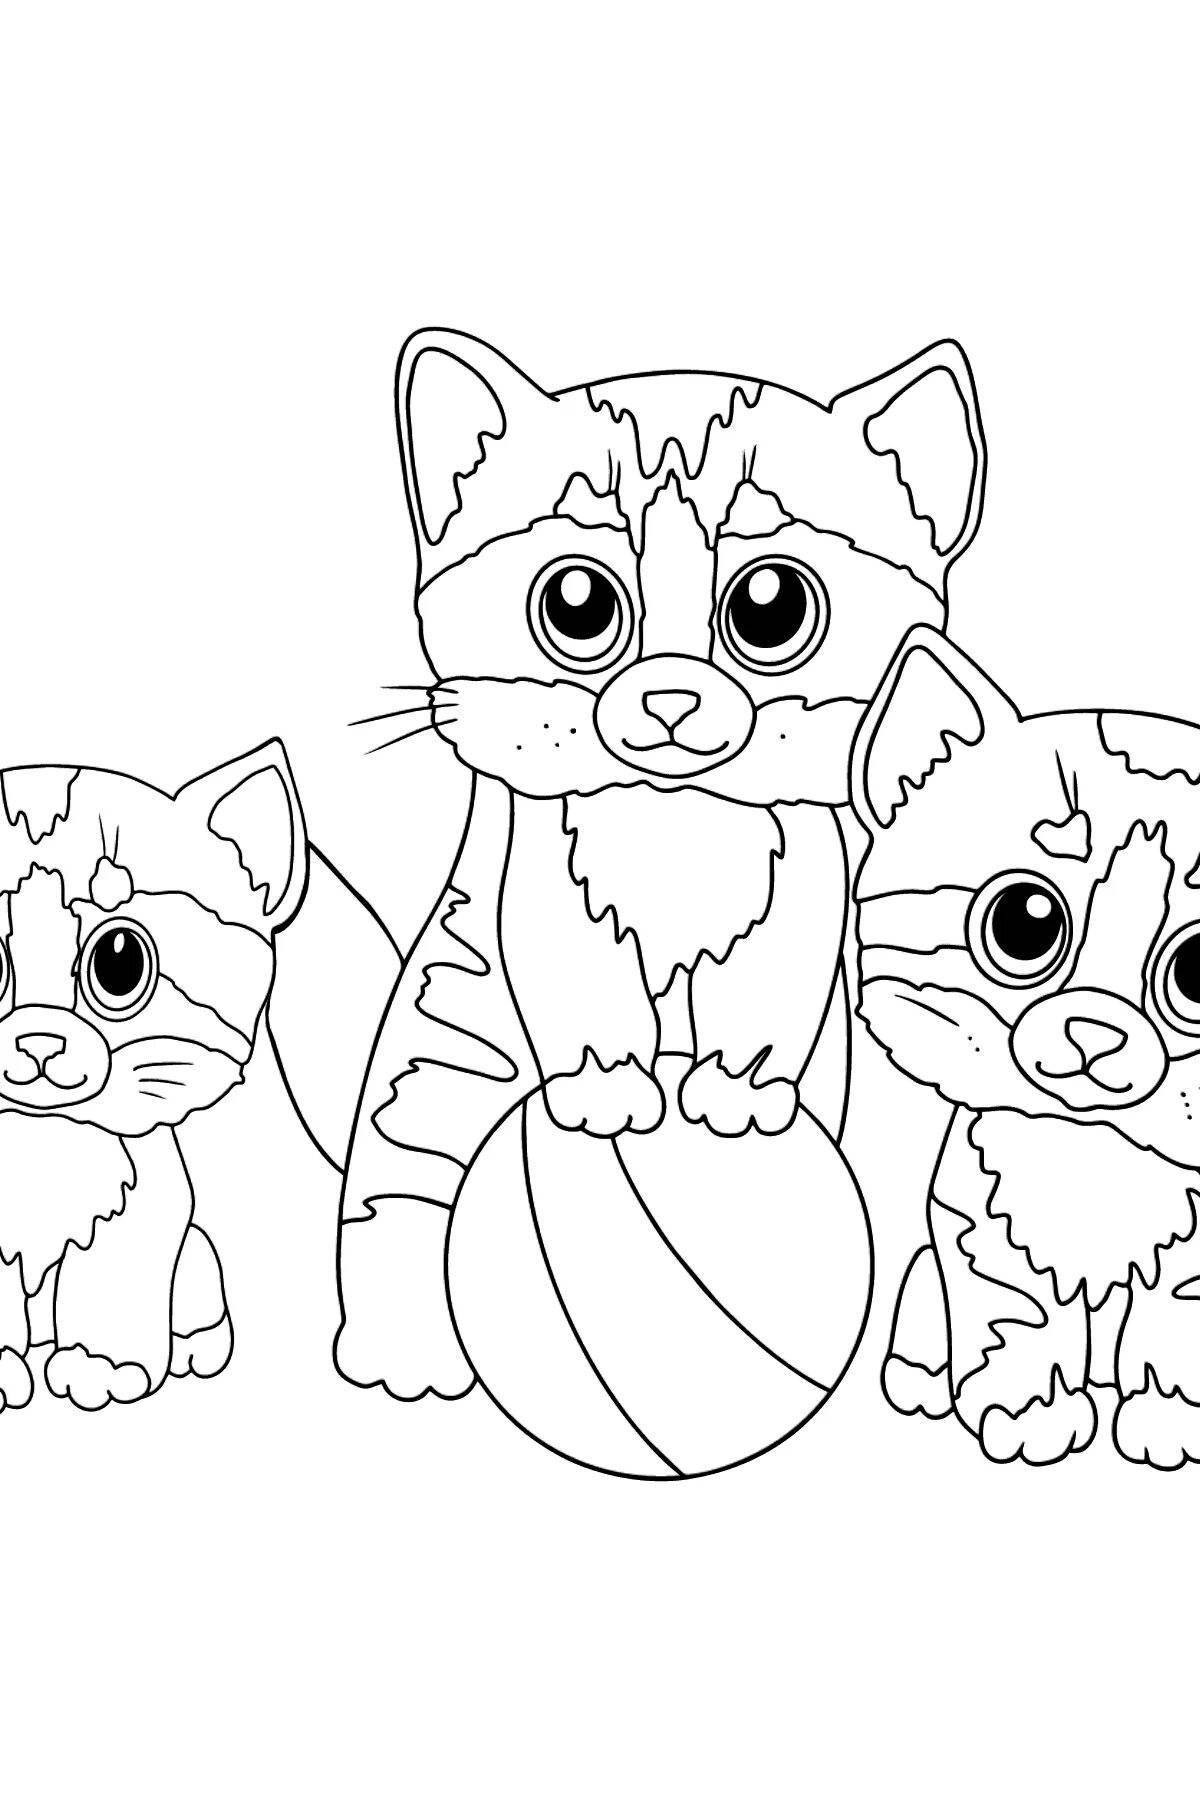 Live coloring of a kitten for children 5-6 years old